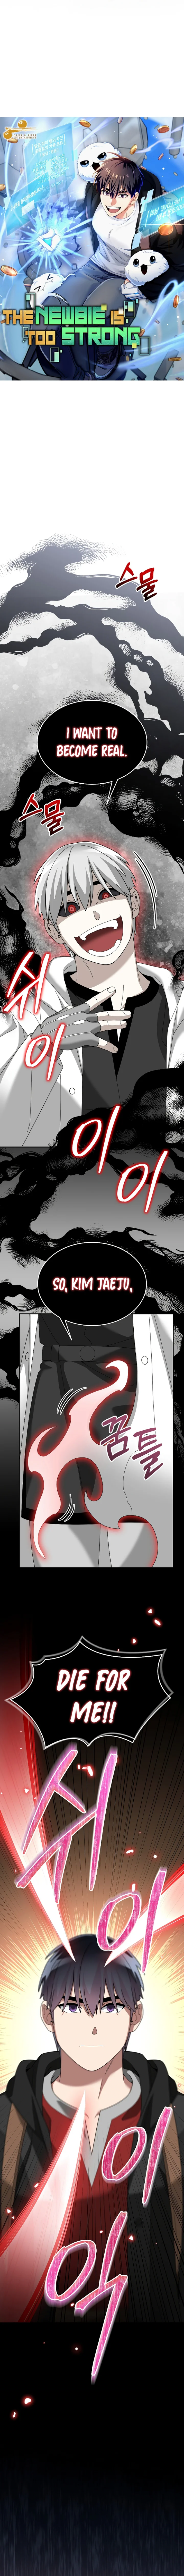 The Newbie is Too Strong - Chapter 88 Page 3